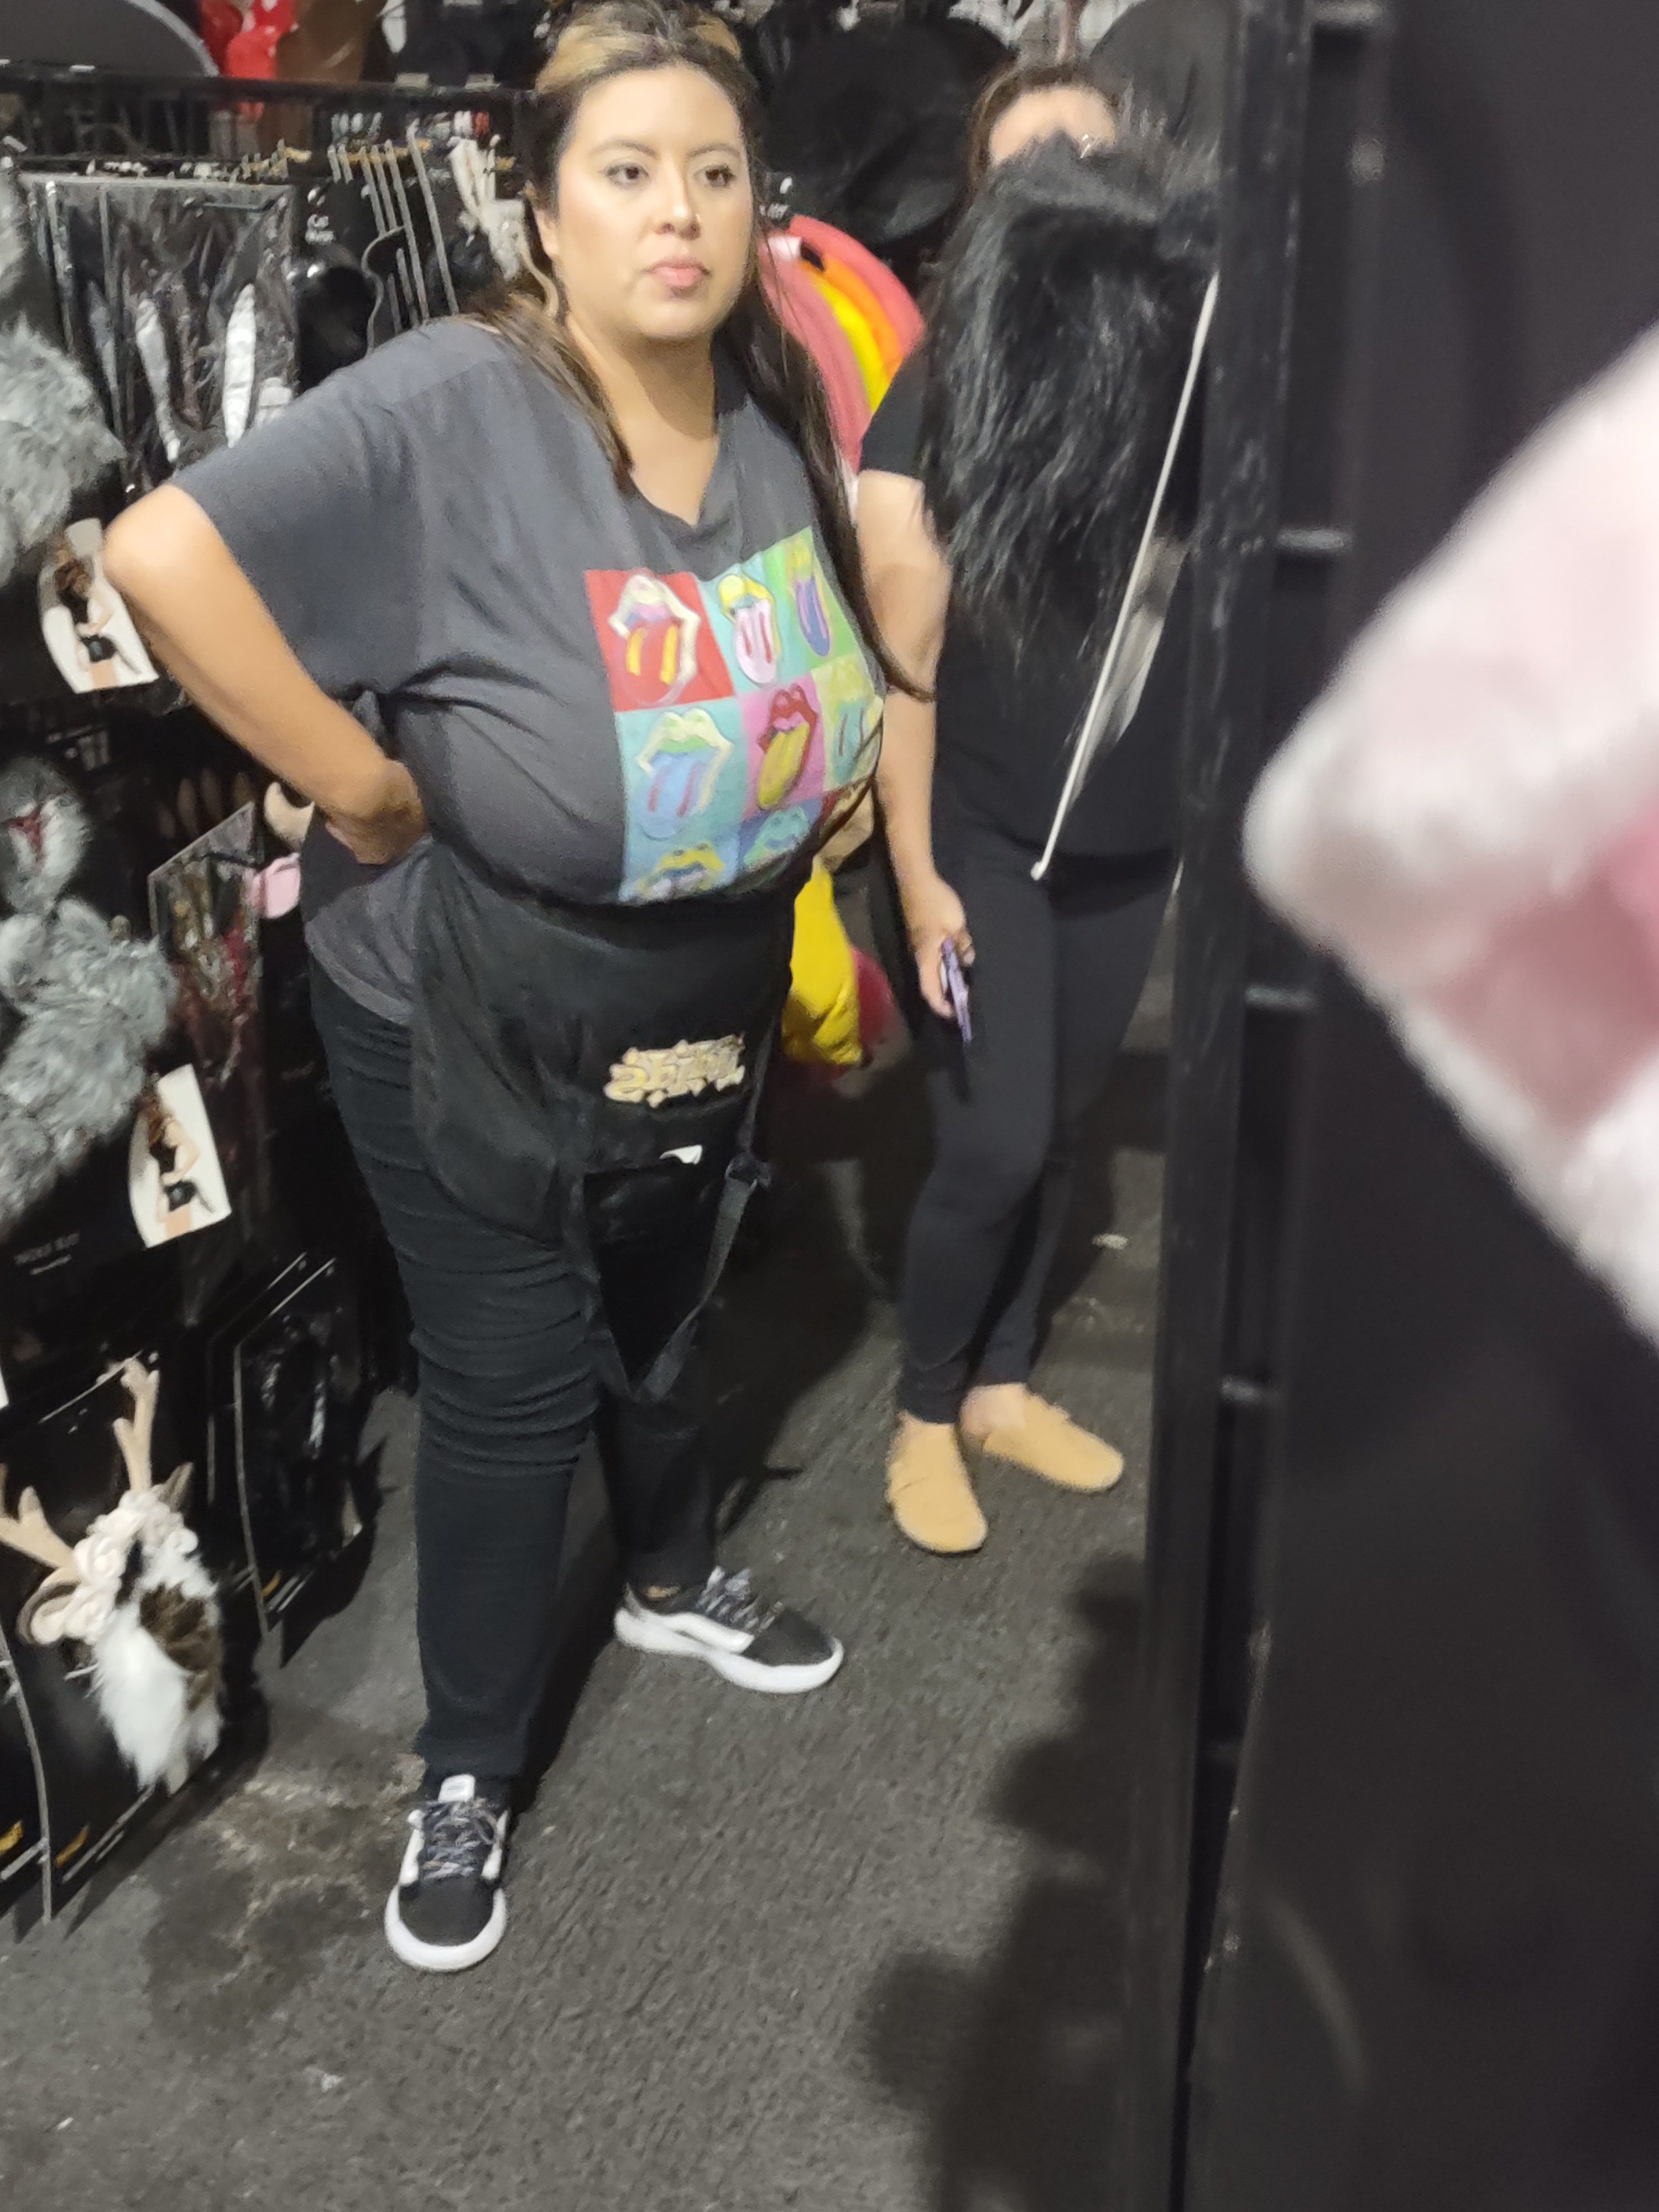 Huge Tits At The Spirit Holoween Store On Bbw Latina My New Obsession Boobs Forum